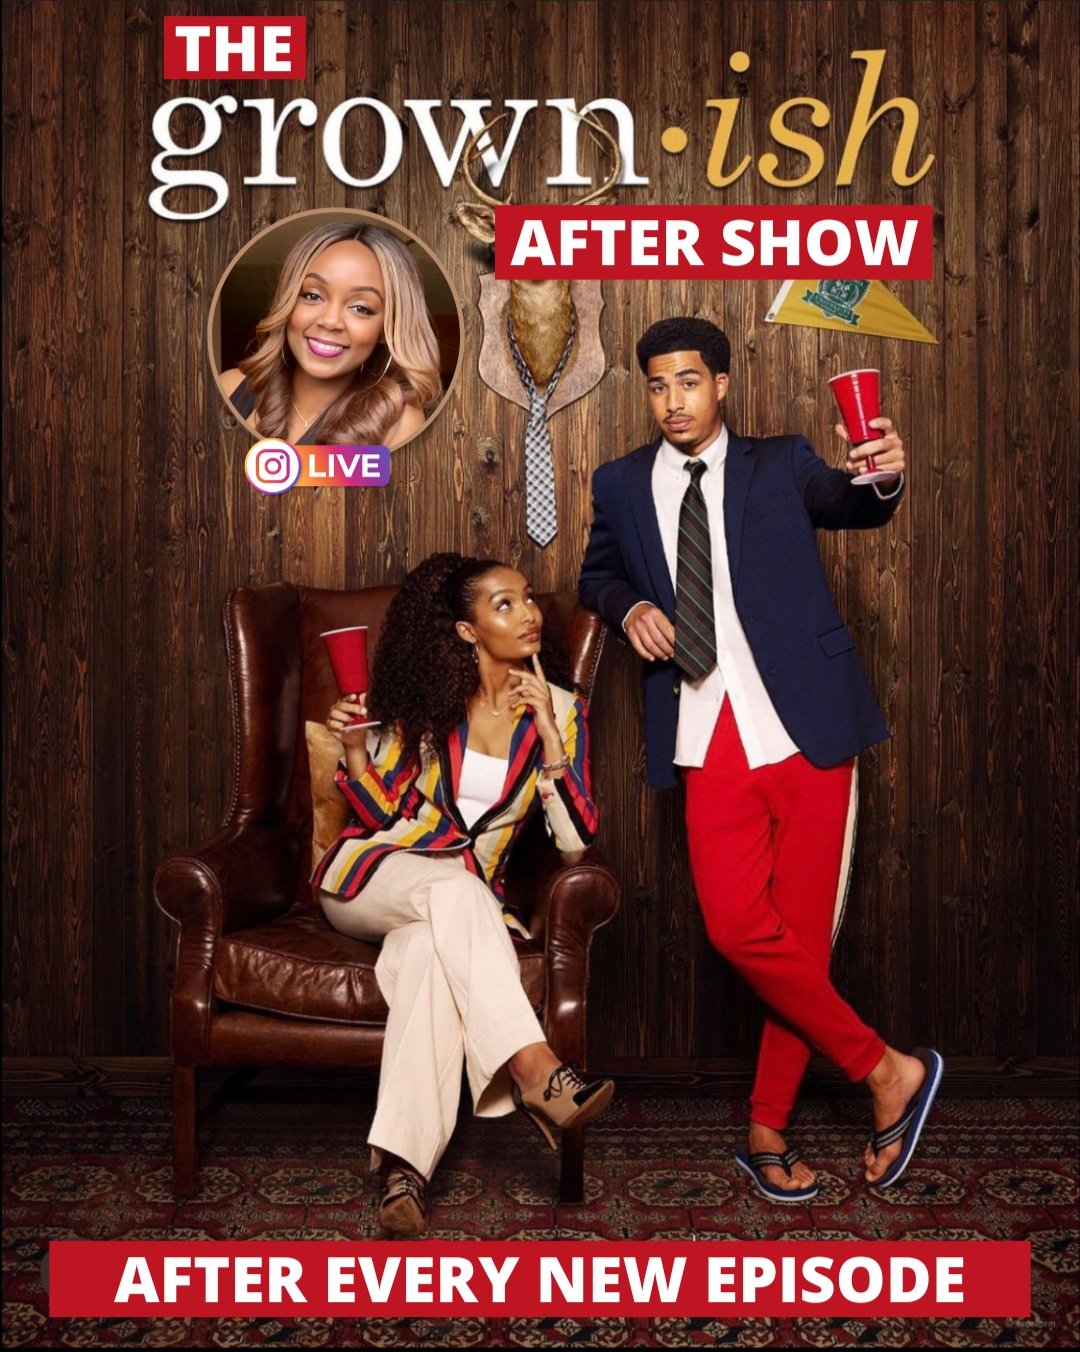 Heads Up…get caught up on @freeform's grown-ish before 3•27 its the #f, grown-ish